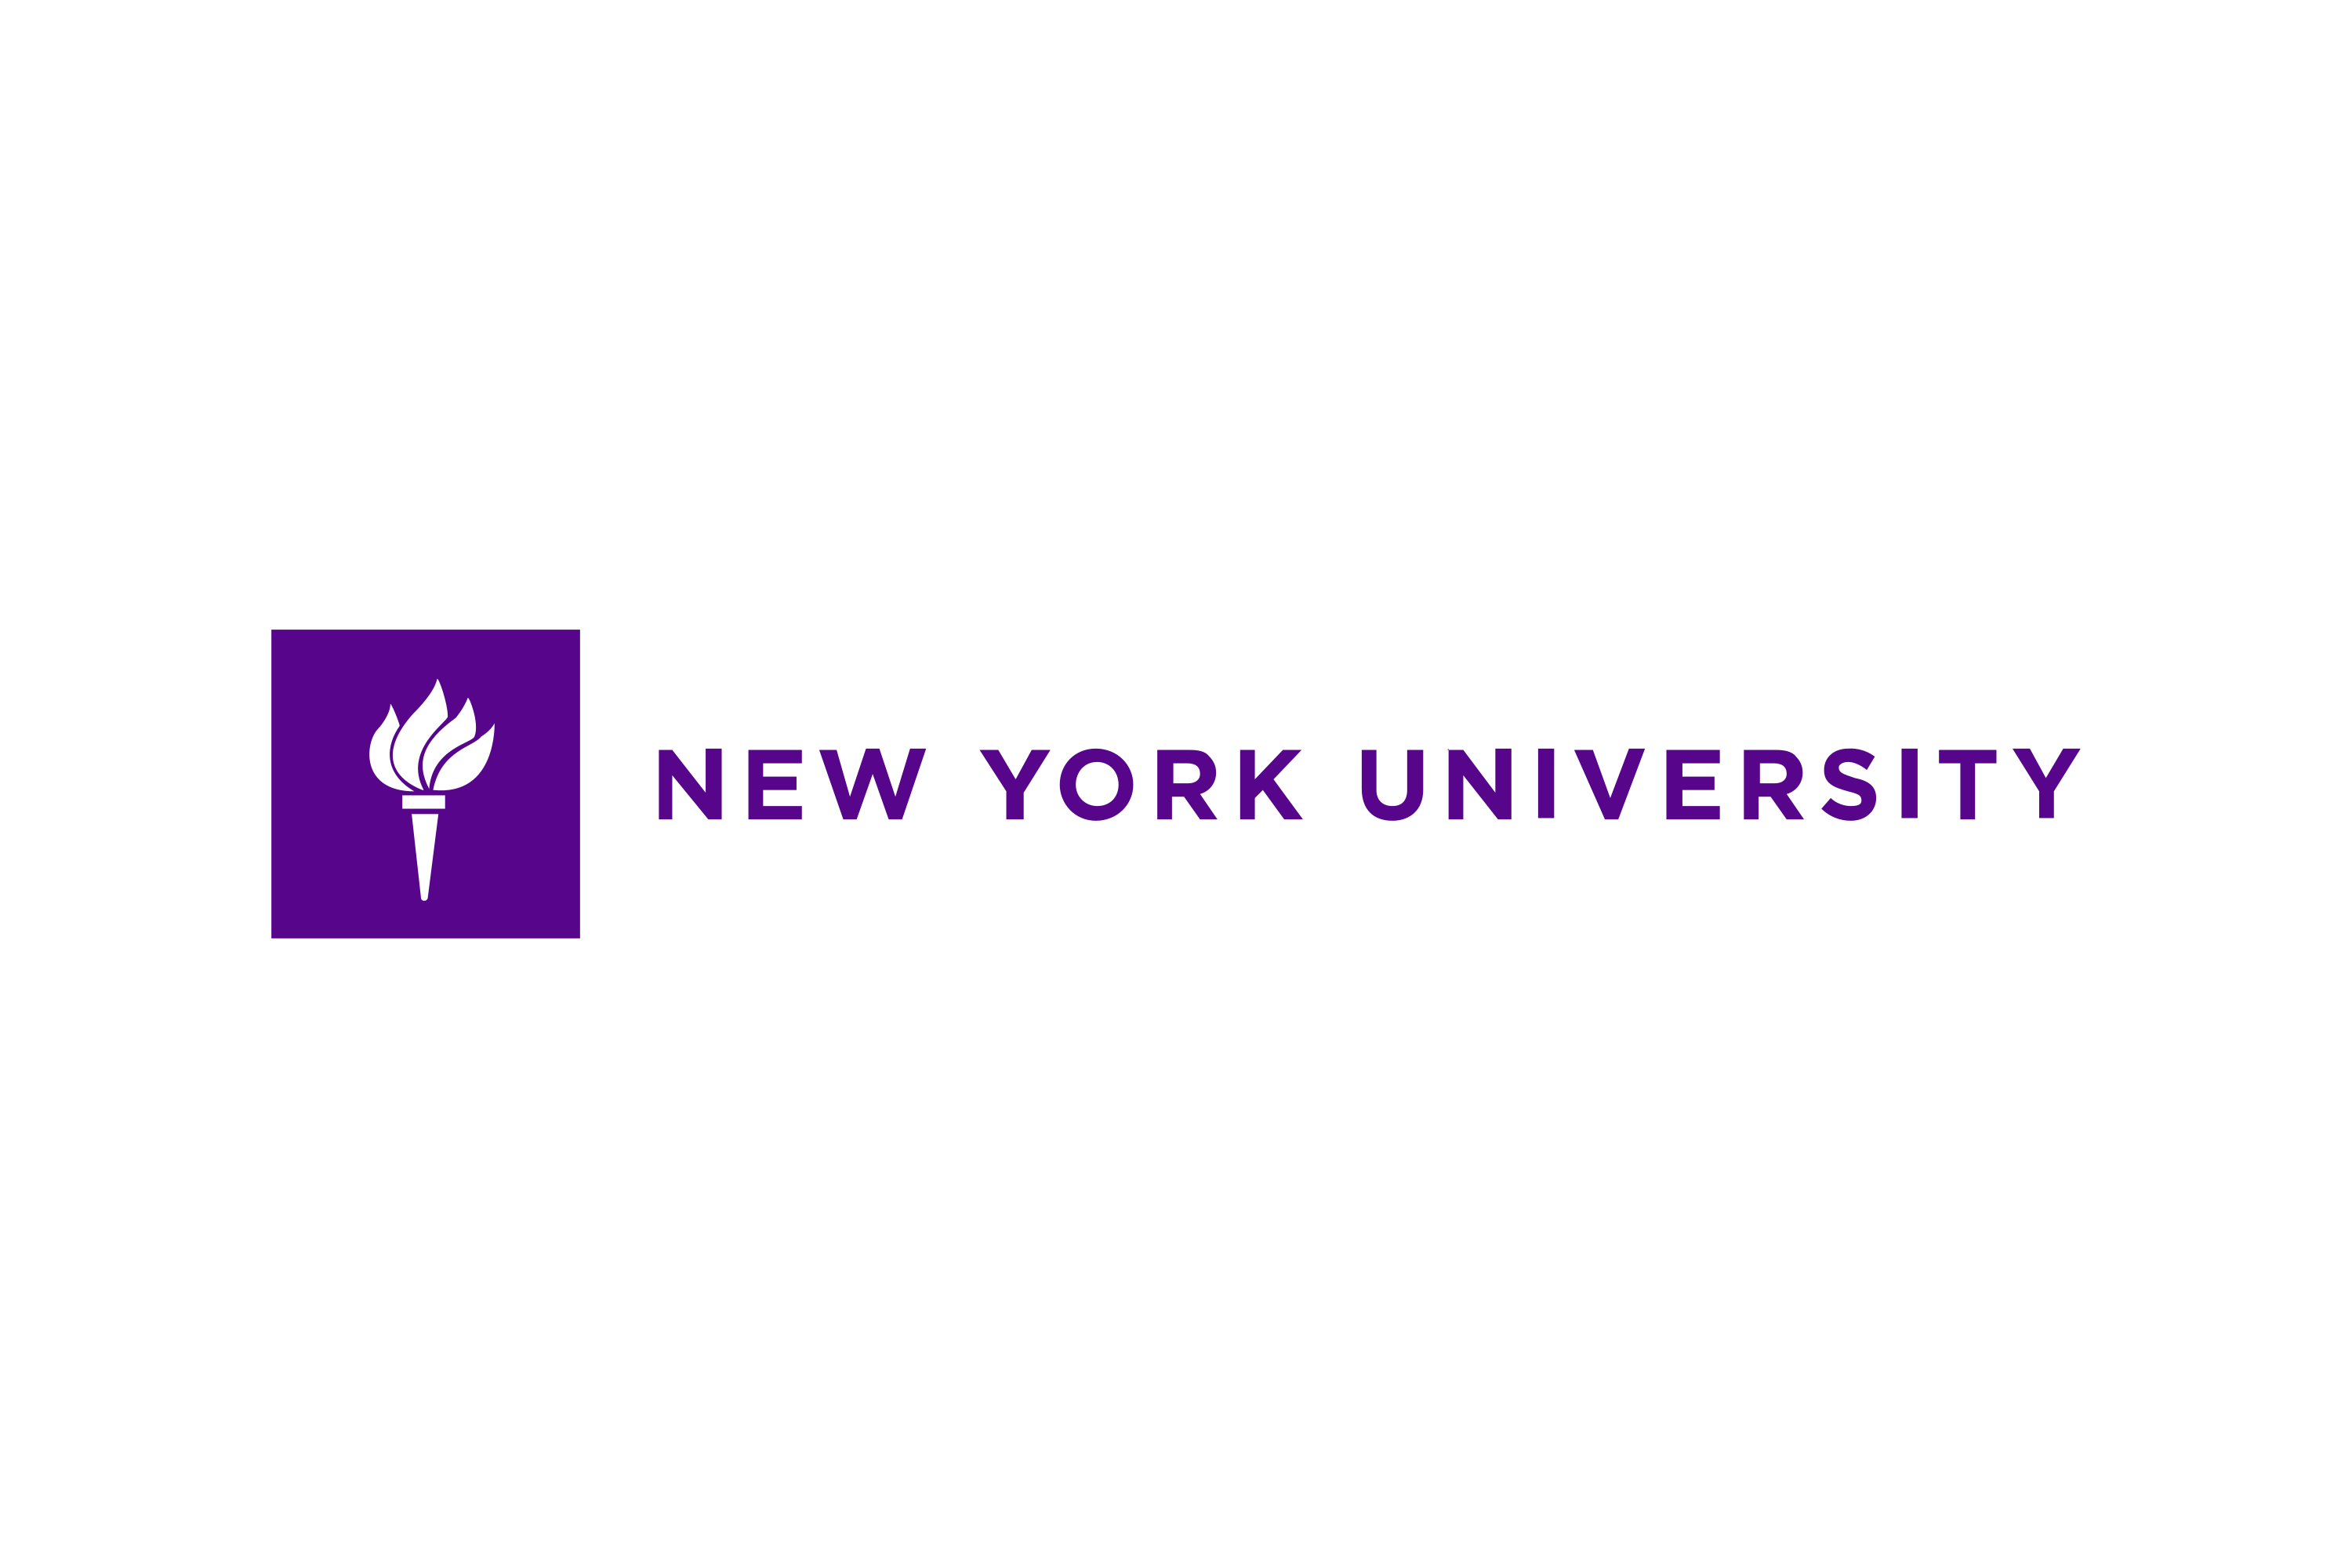 You are currently viewing New York University: Sources of Information Influence COVID-19 Knowledge, Protective Behaviors